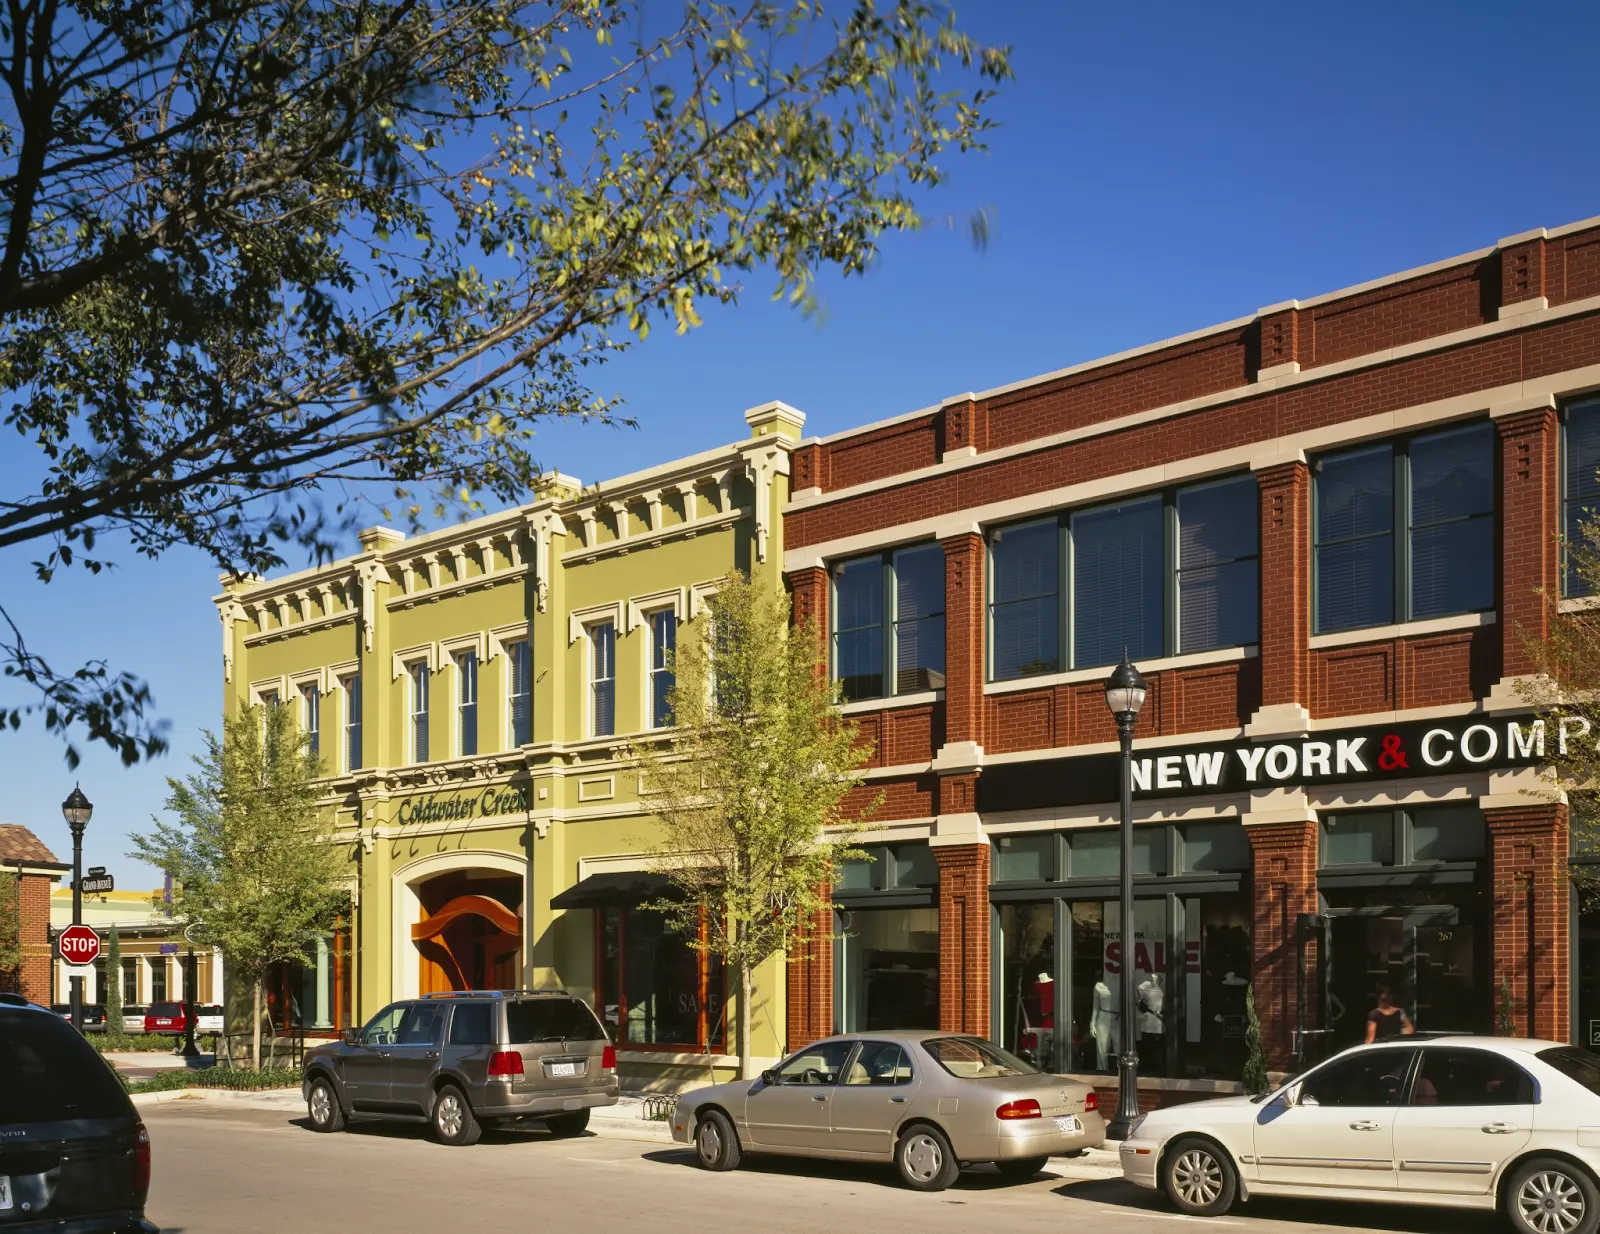 Southlake Town Square - Things to do in Southlake